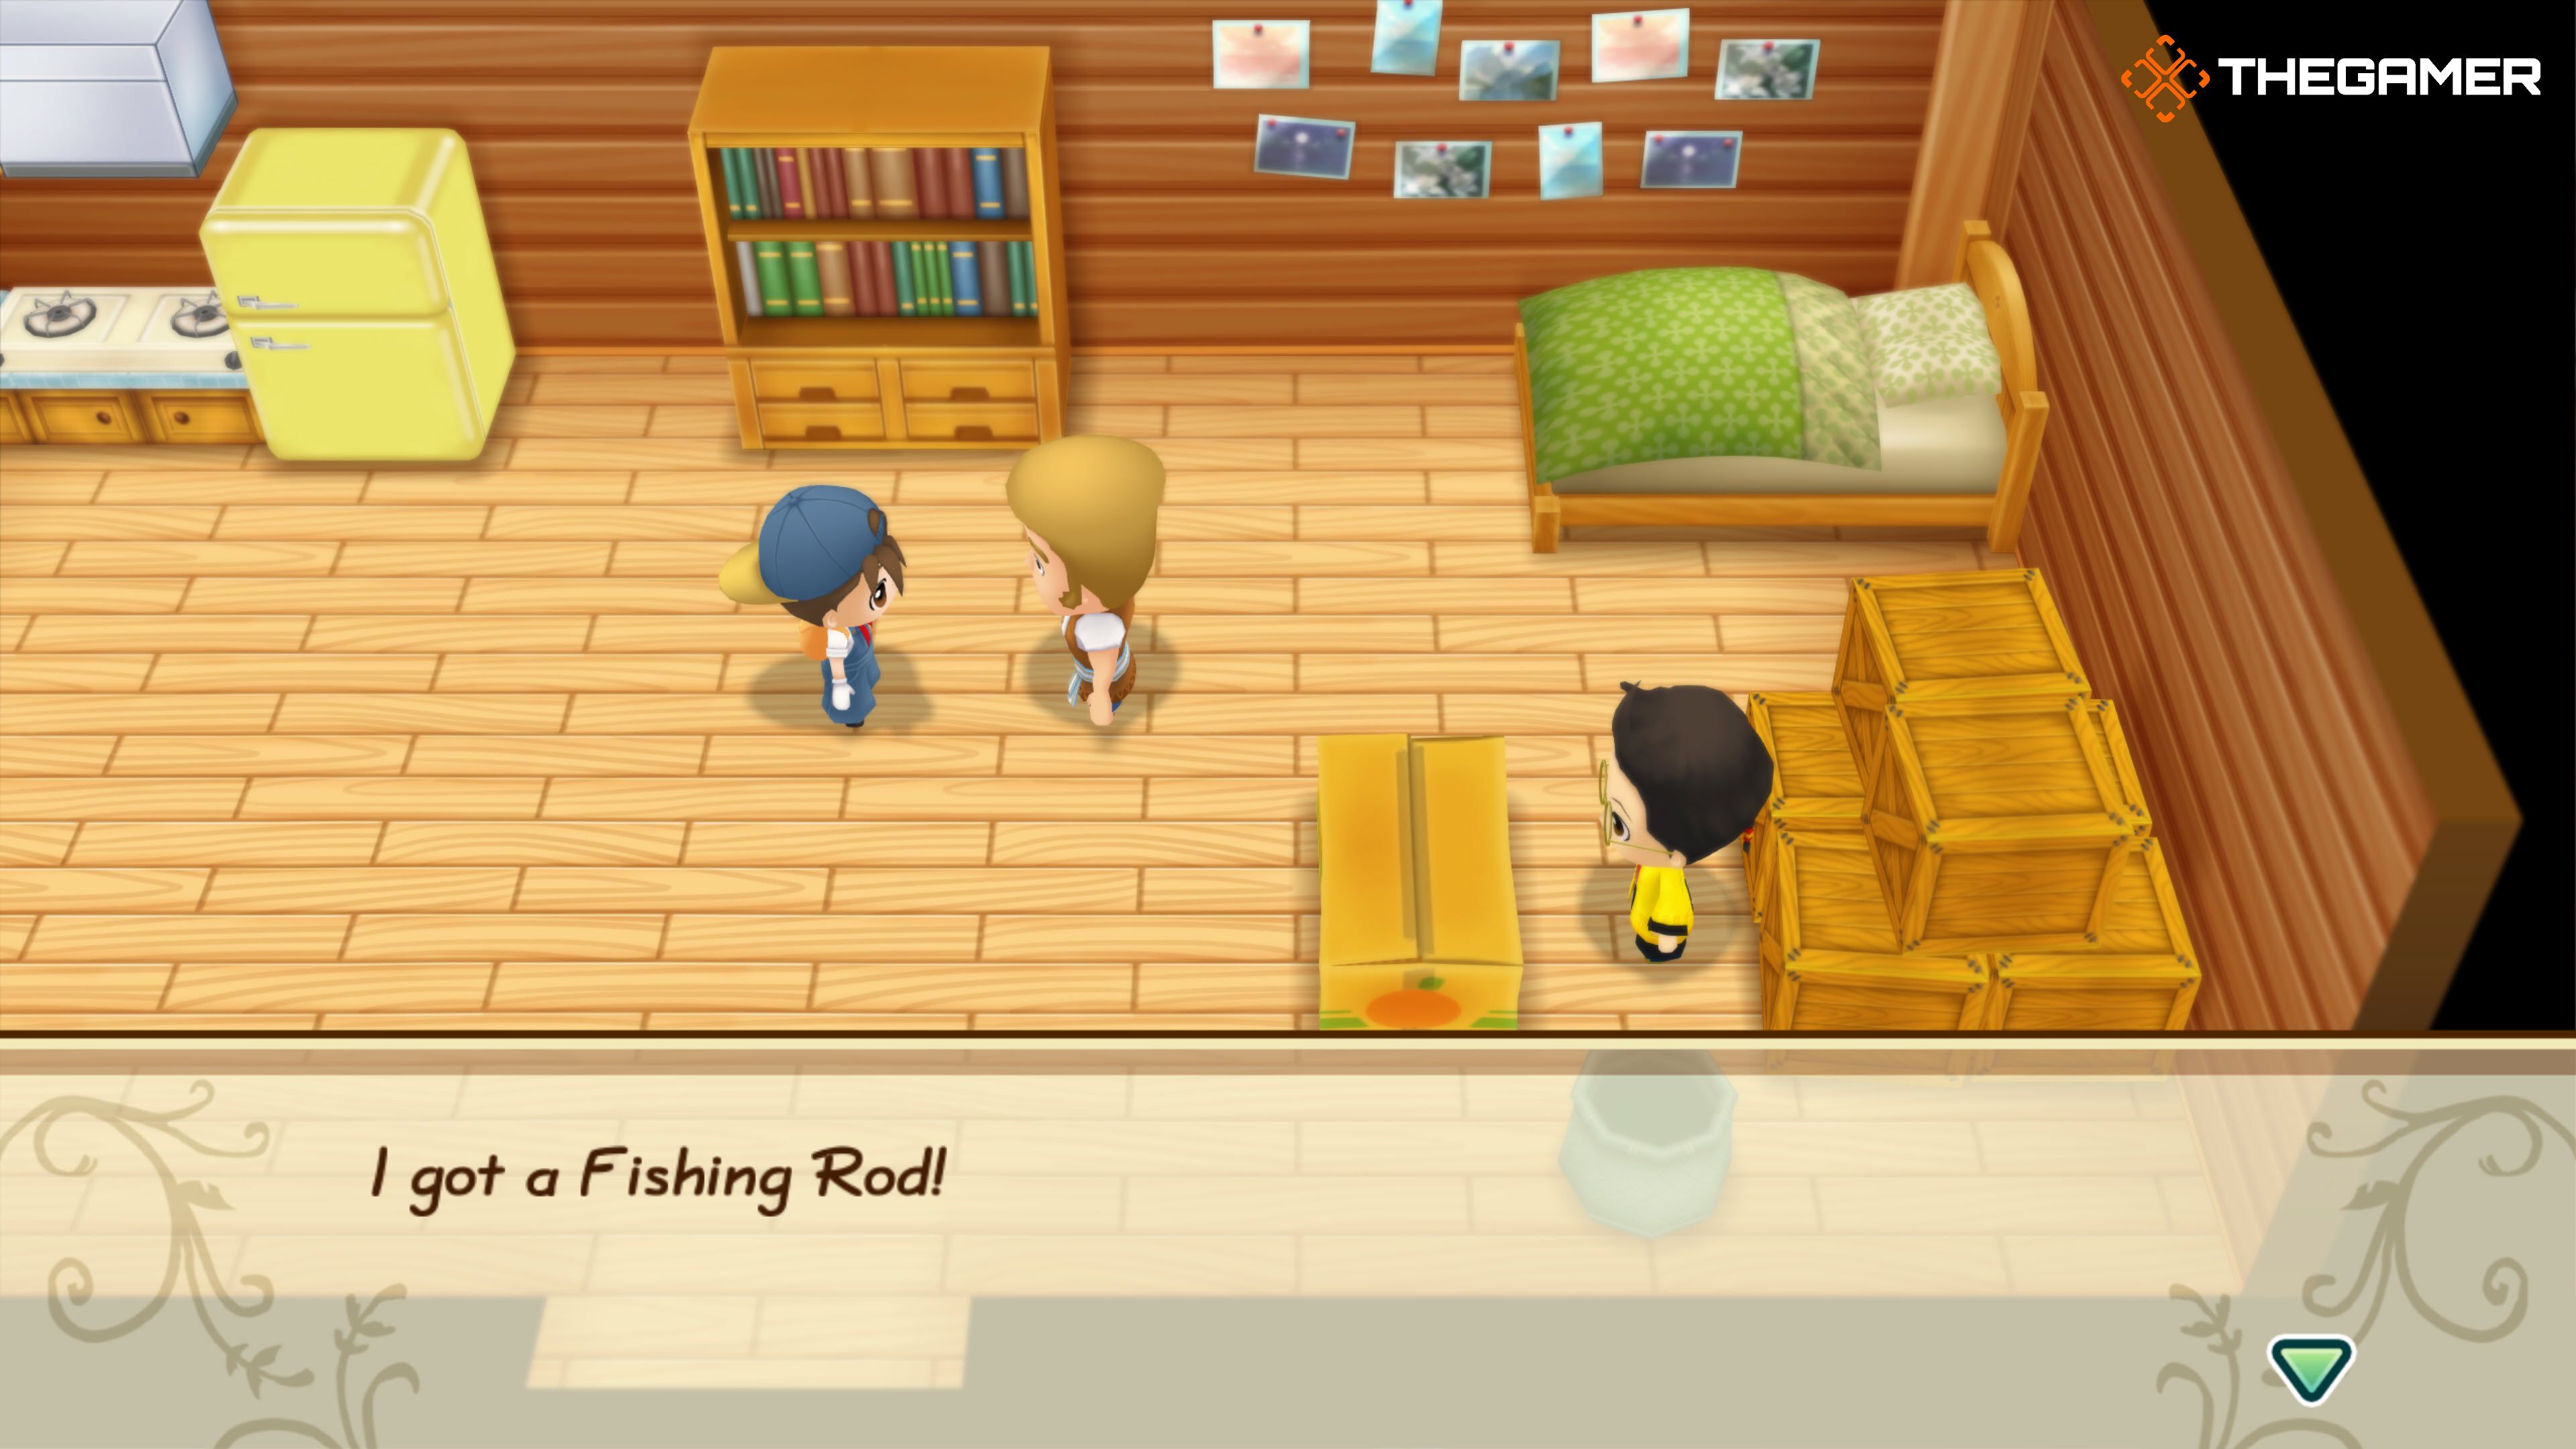 Getting the Fishing Rod from Zack in his beach hut